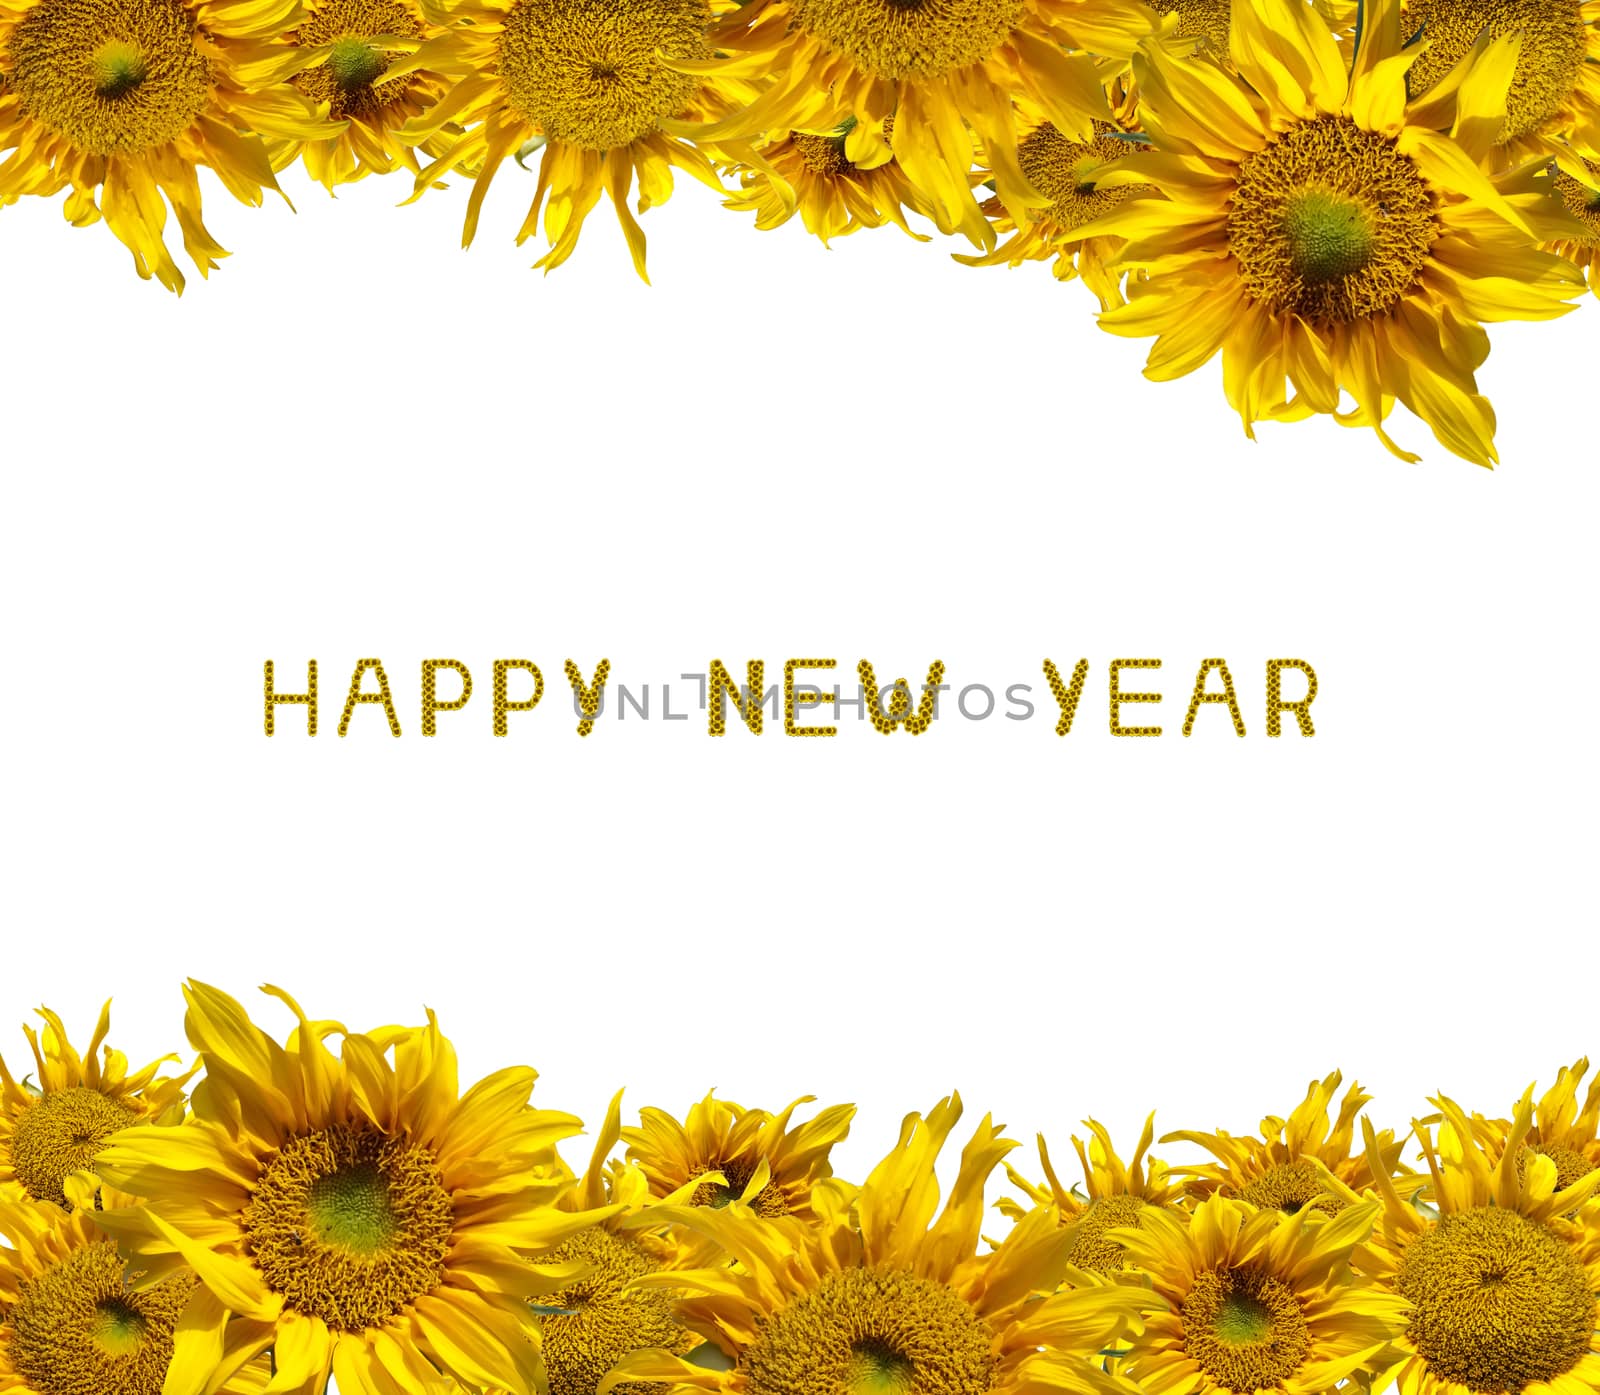 Sunflowers Happy New Year by Exsodus